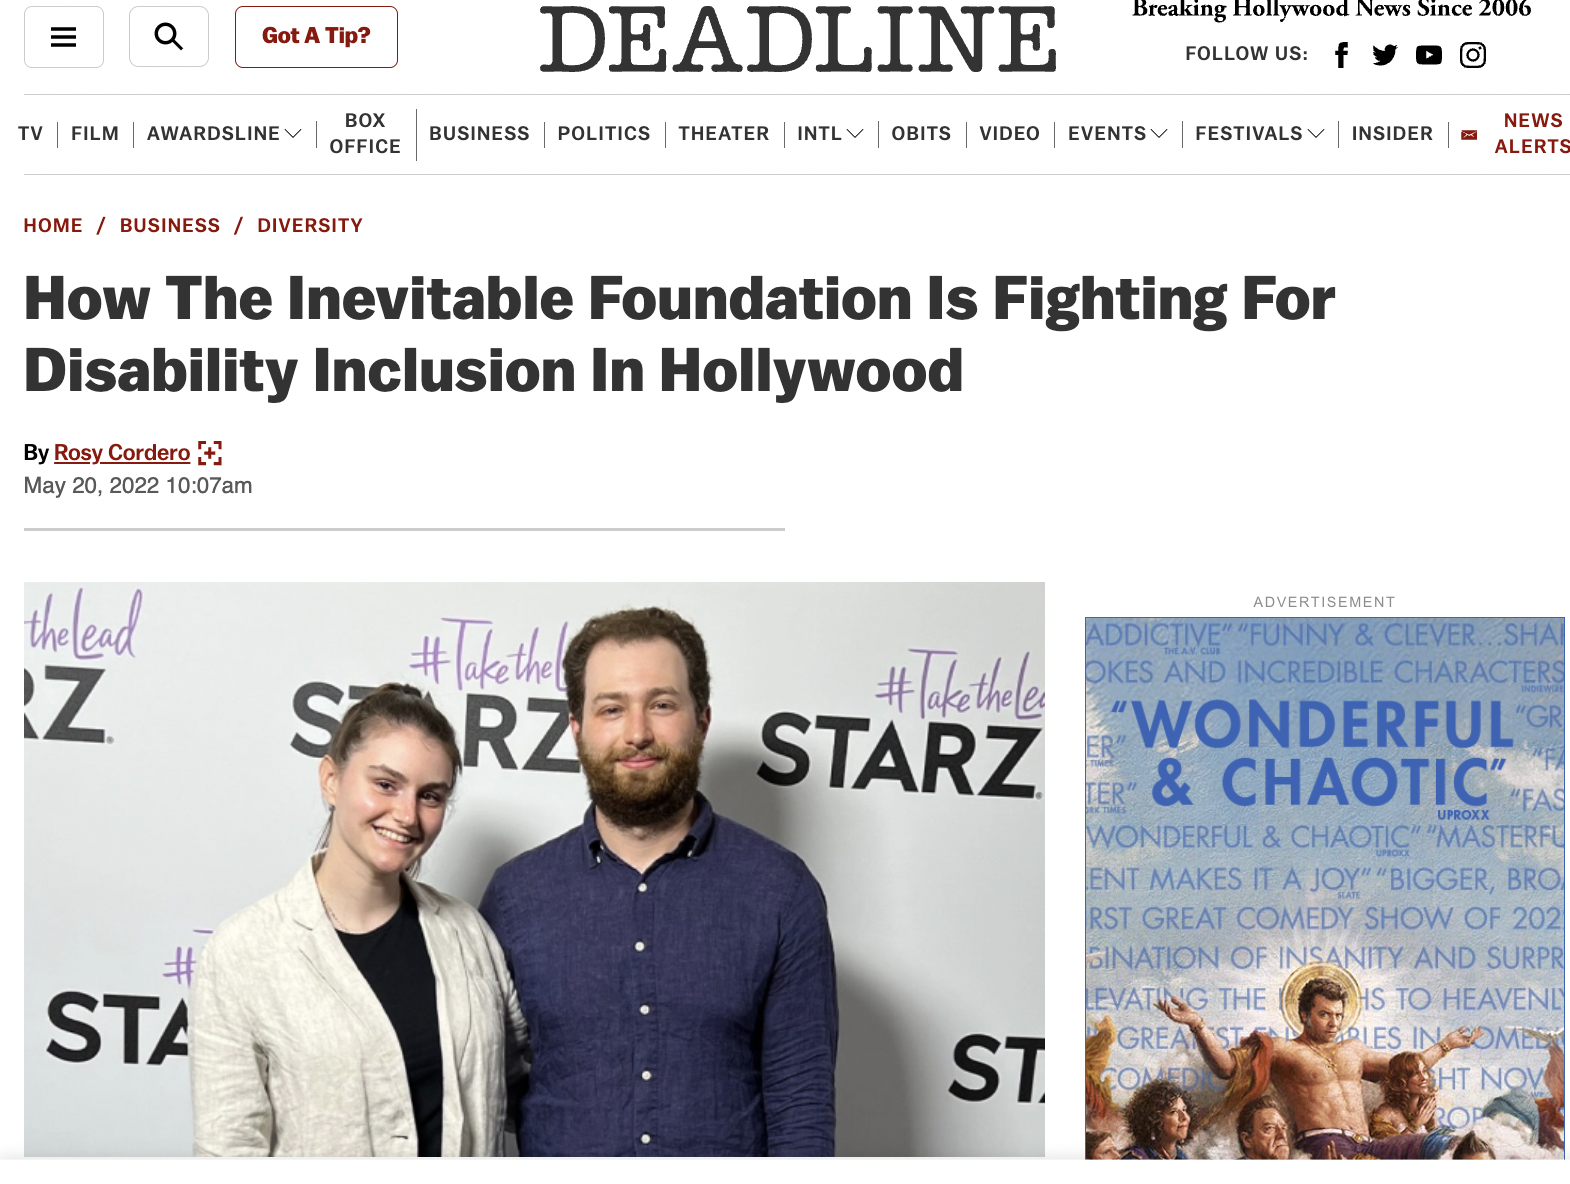 Deadline article titled 'How the Inevitable Foundation is Fighting for Disability Inclusion in Hollywood'